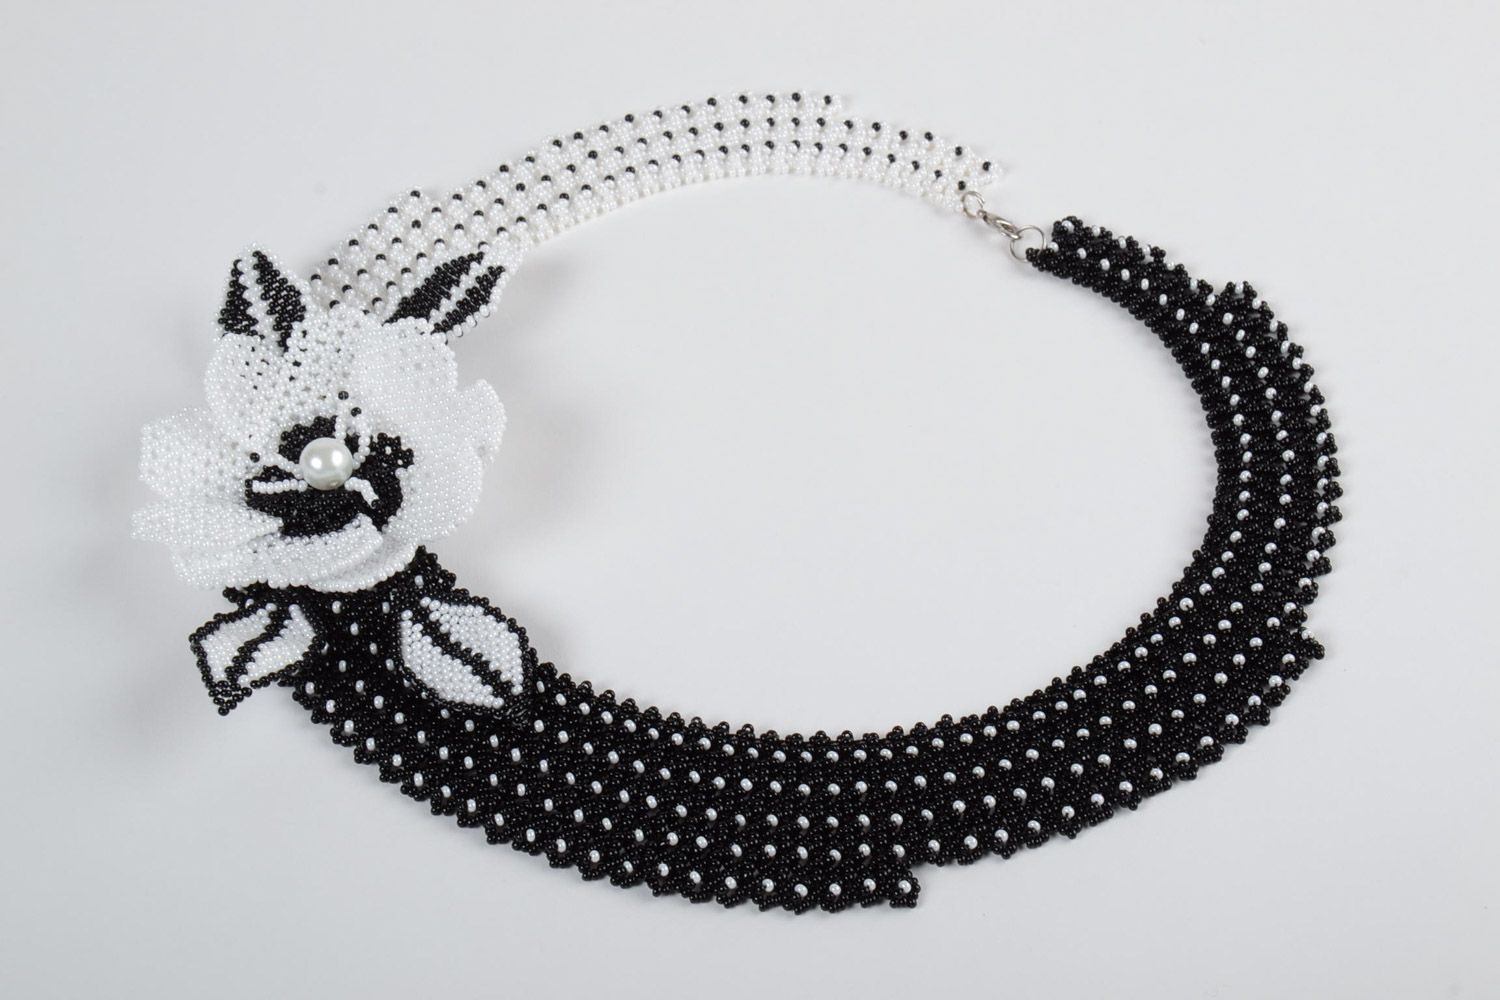 Handmade beautiful necklace made of Czech beads with a large black and white flower photo 2